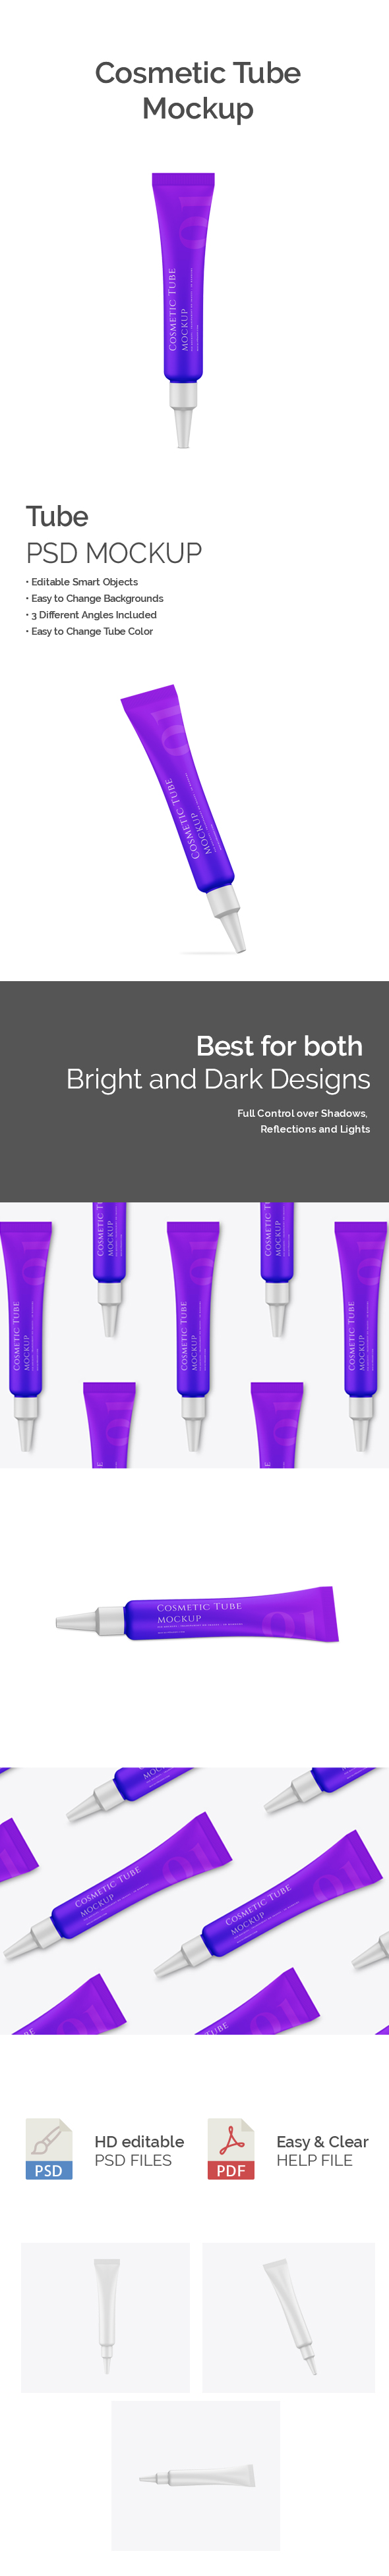 Blue cosmetic packaging Tube Psd Mockup with white cap.